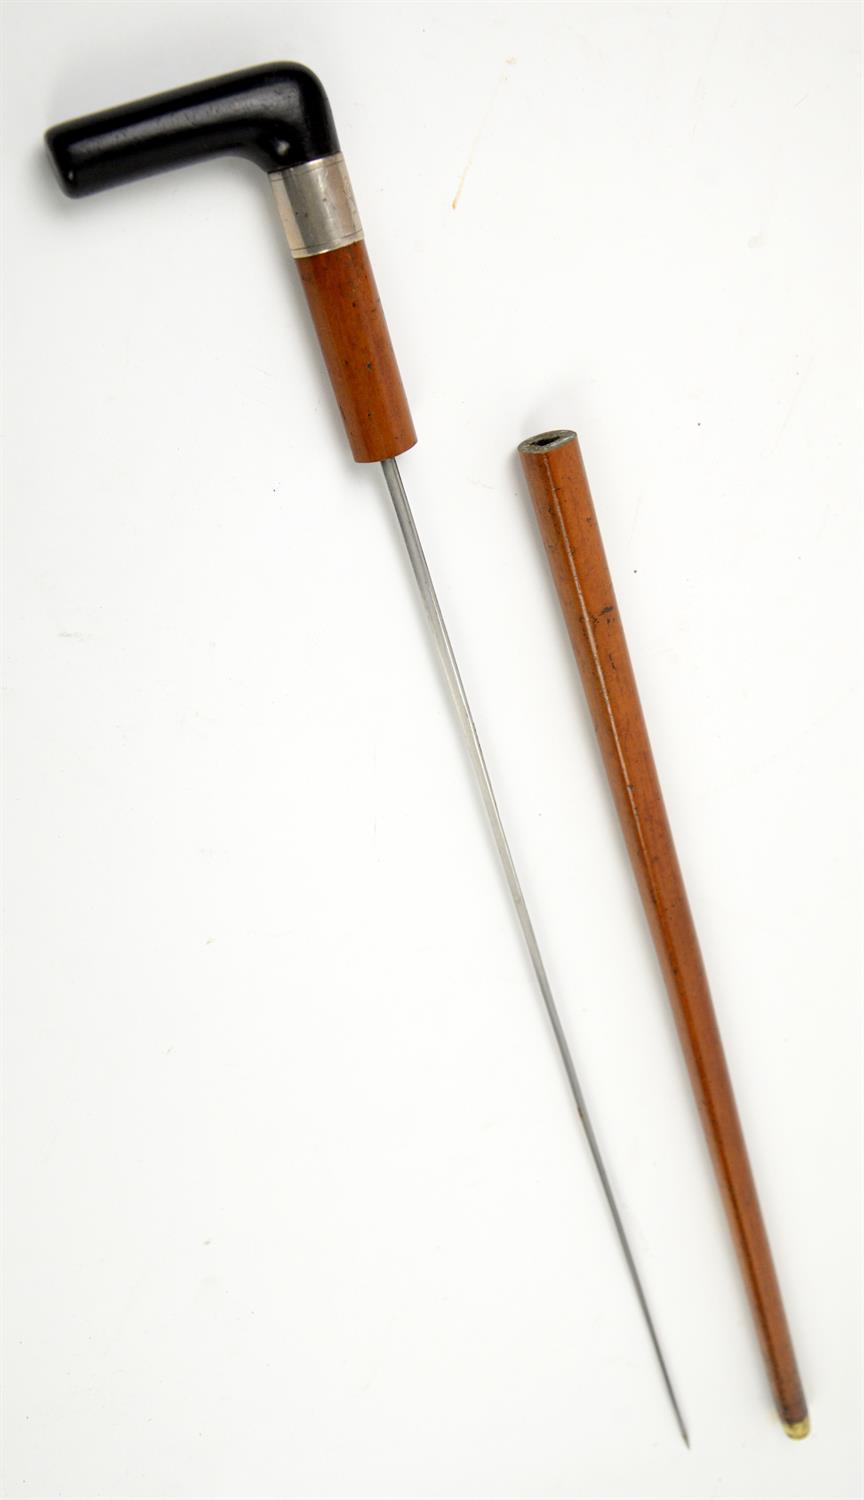 Late 19th century malacca swordstick with ebony handle and white metal mount, 84.5cm long, - Image 2 of 2